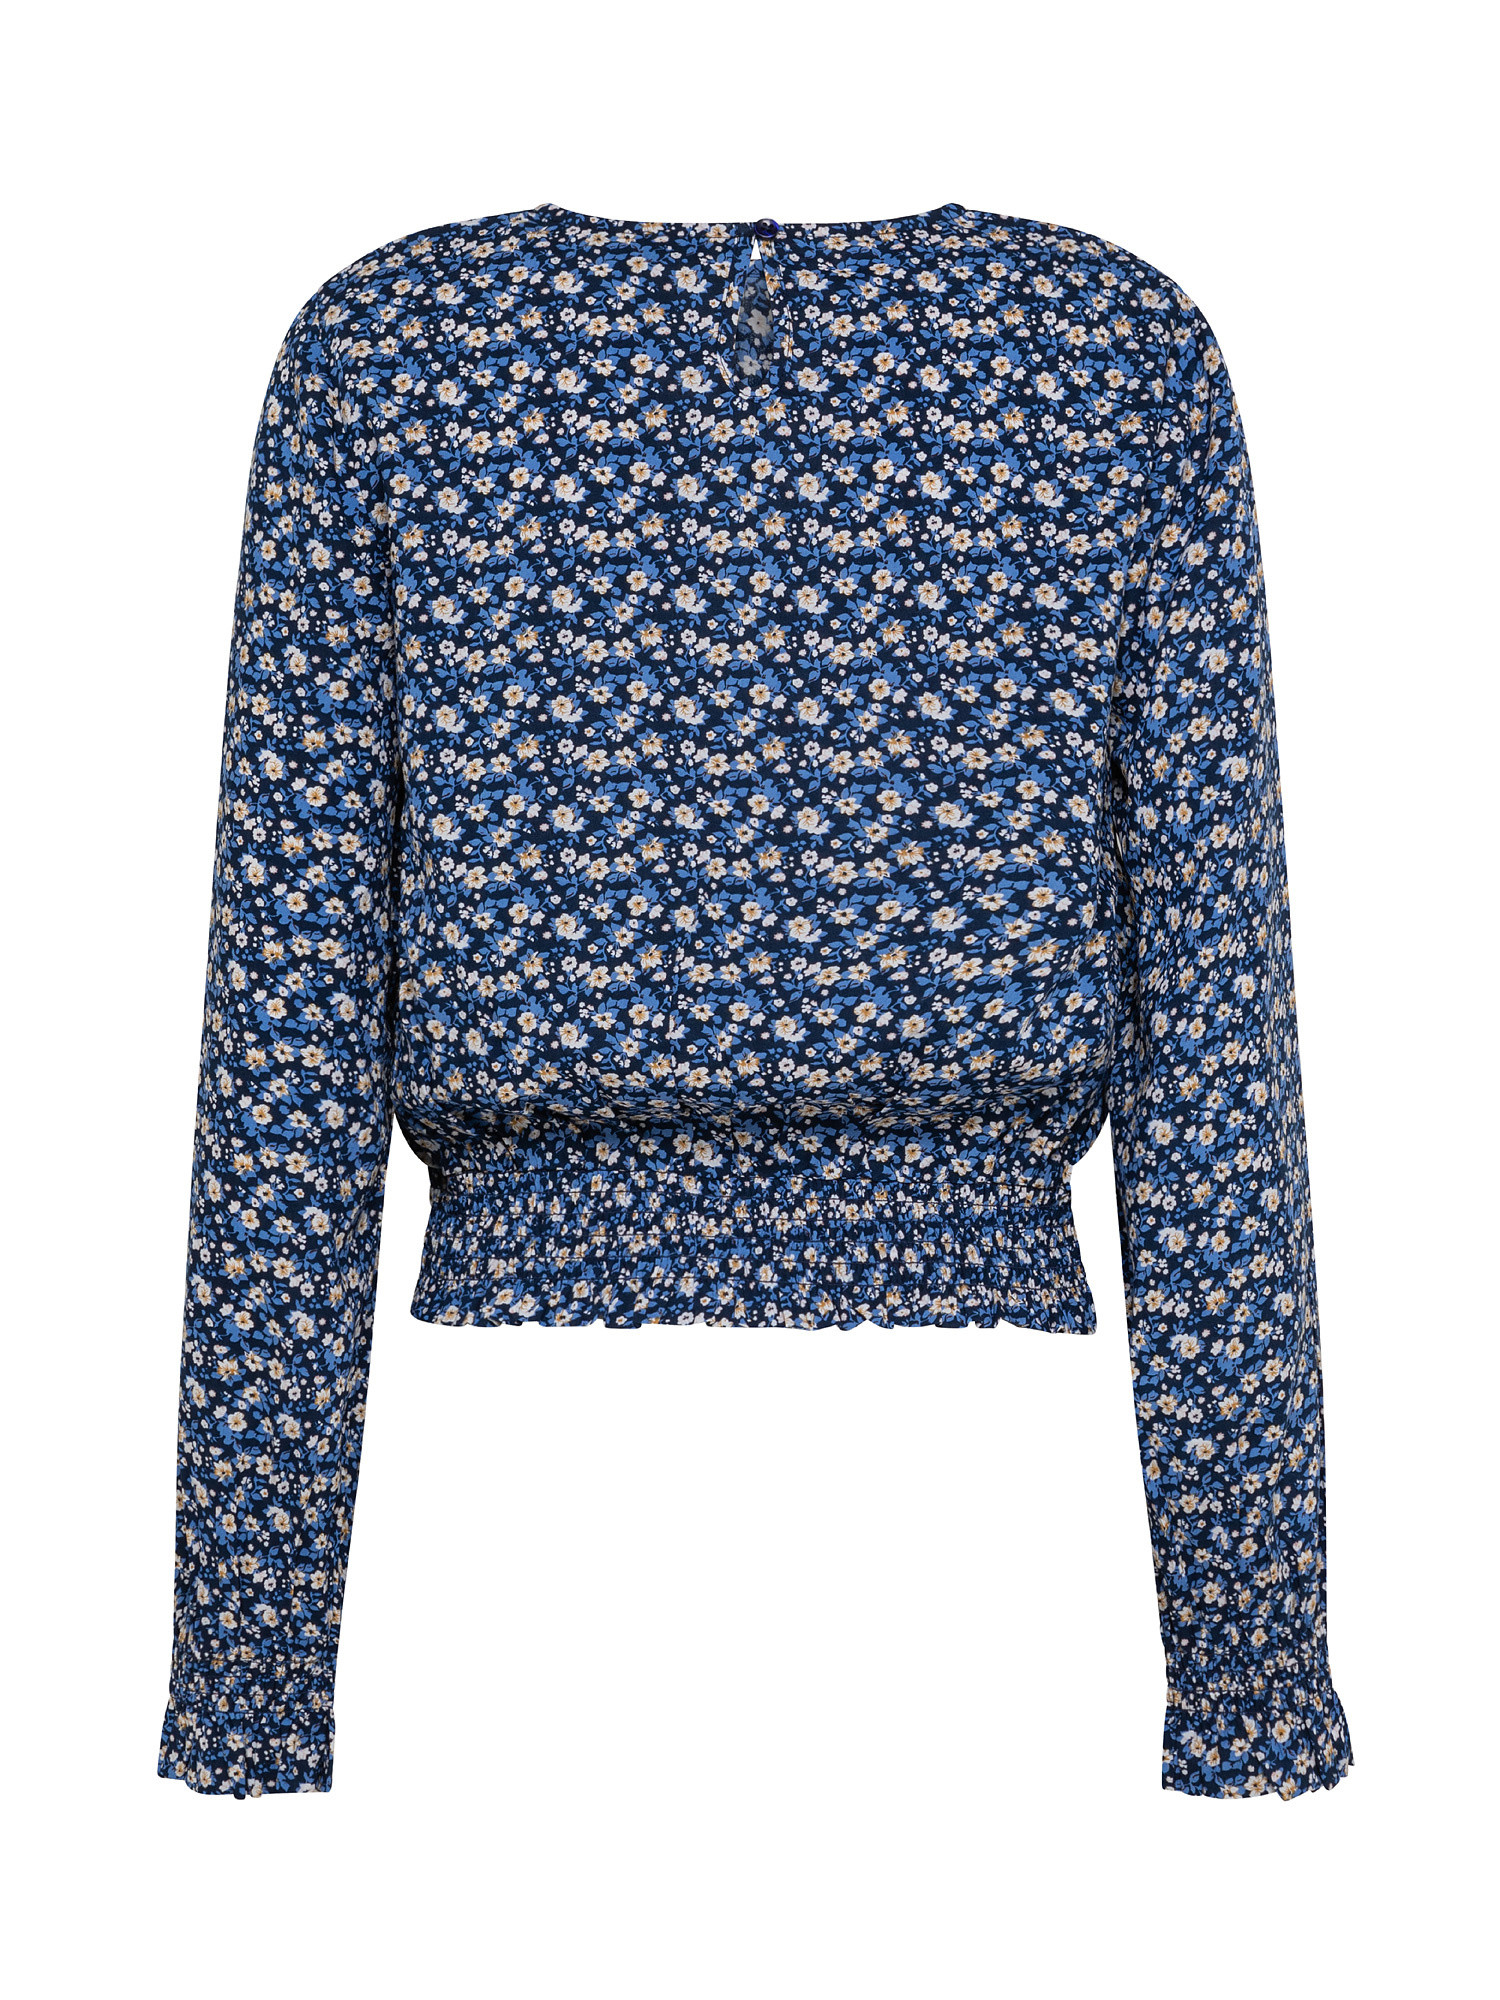 Blouse with flowers, Blue, large image number 1